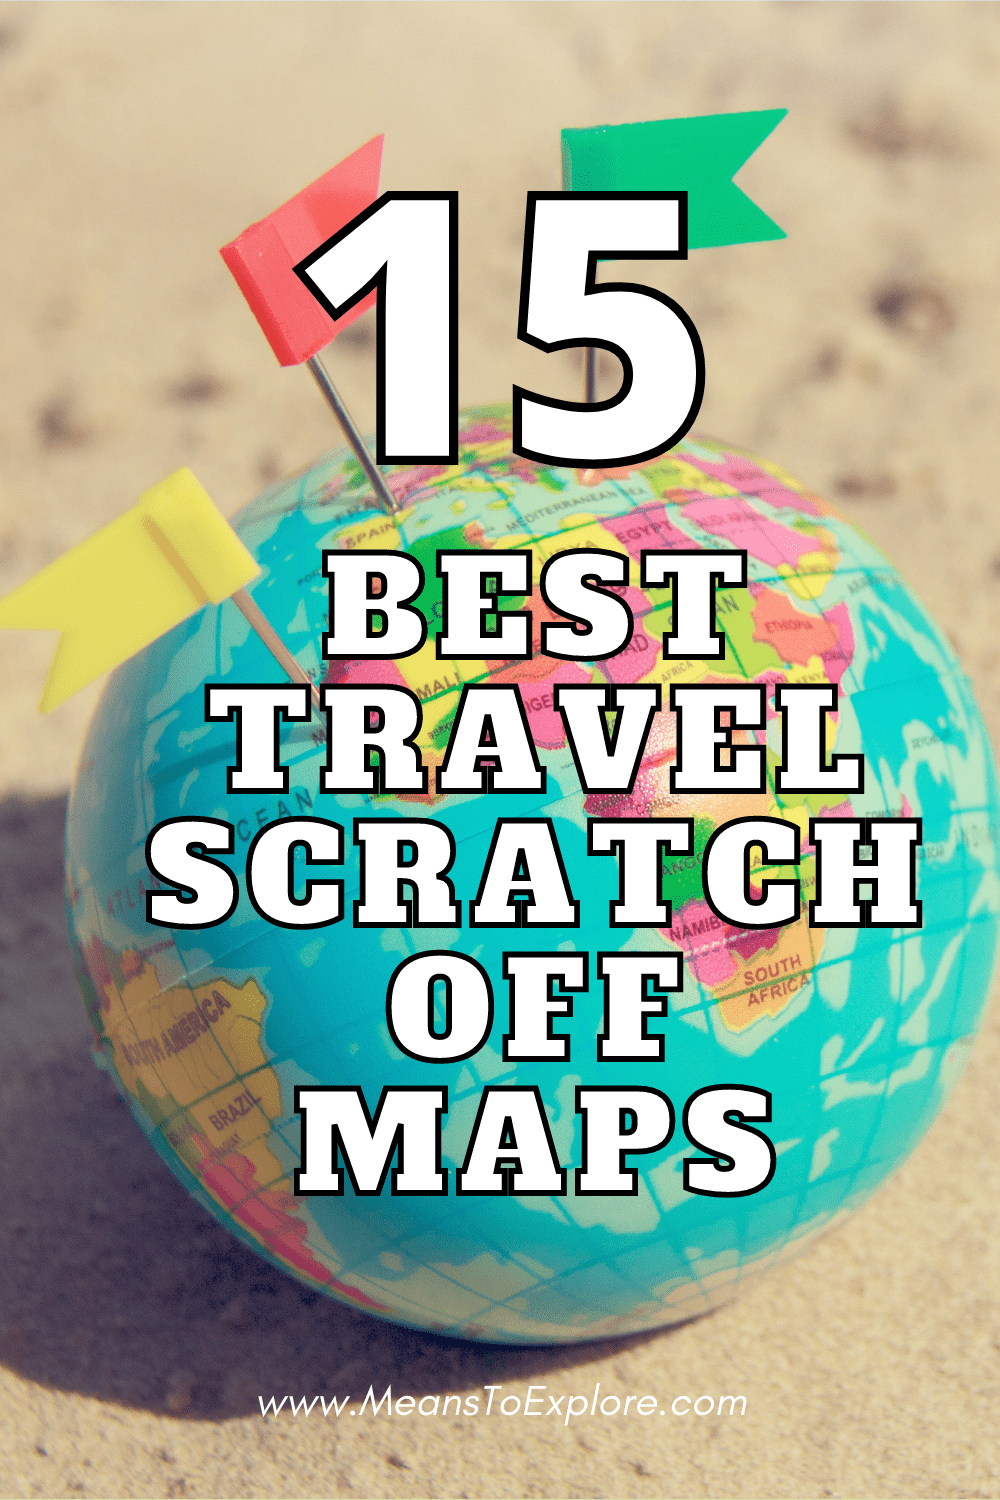 15 Best Travel Scratch Off Maps for Travel Lovers